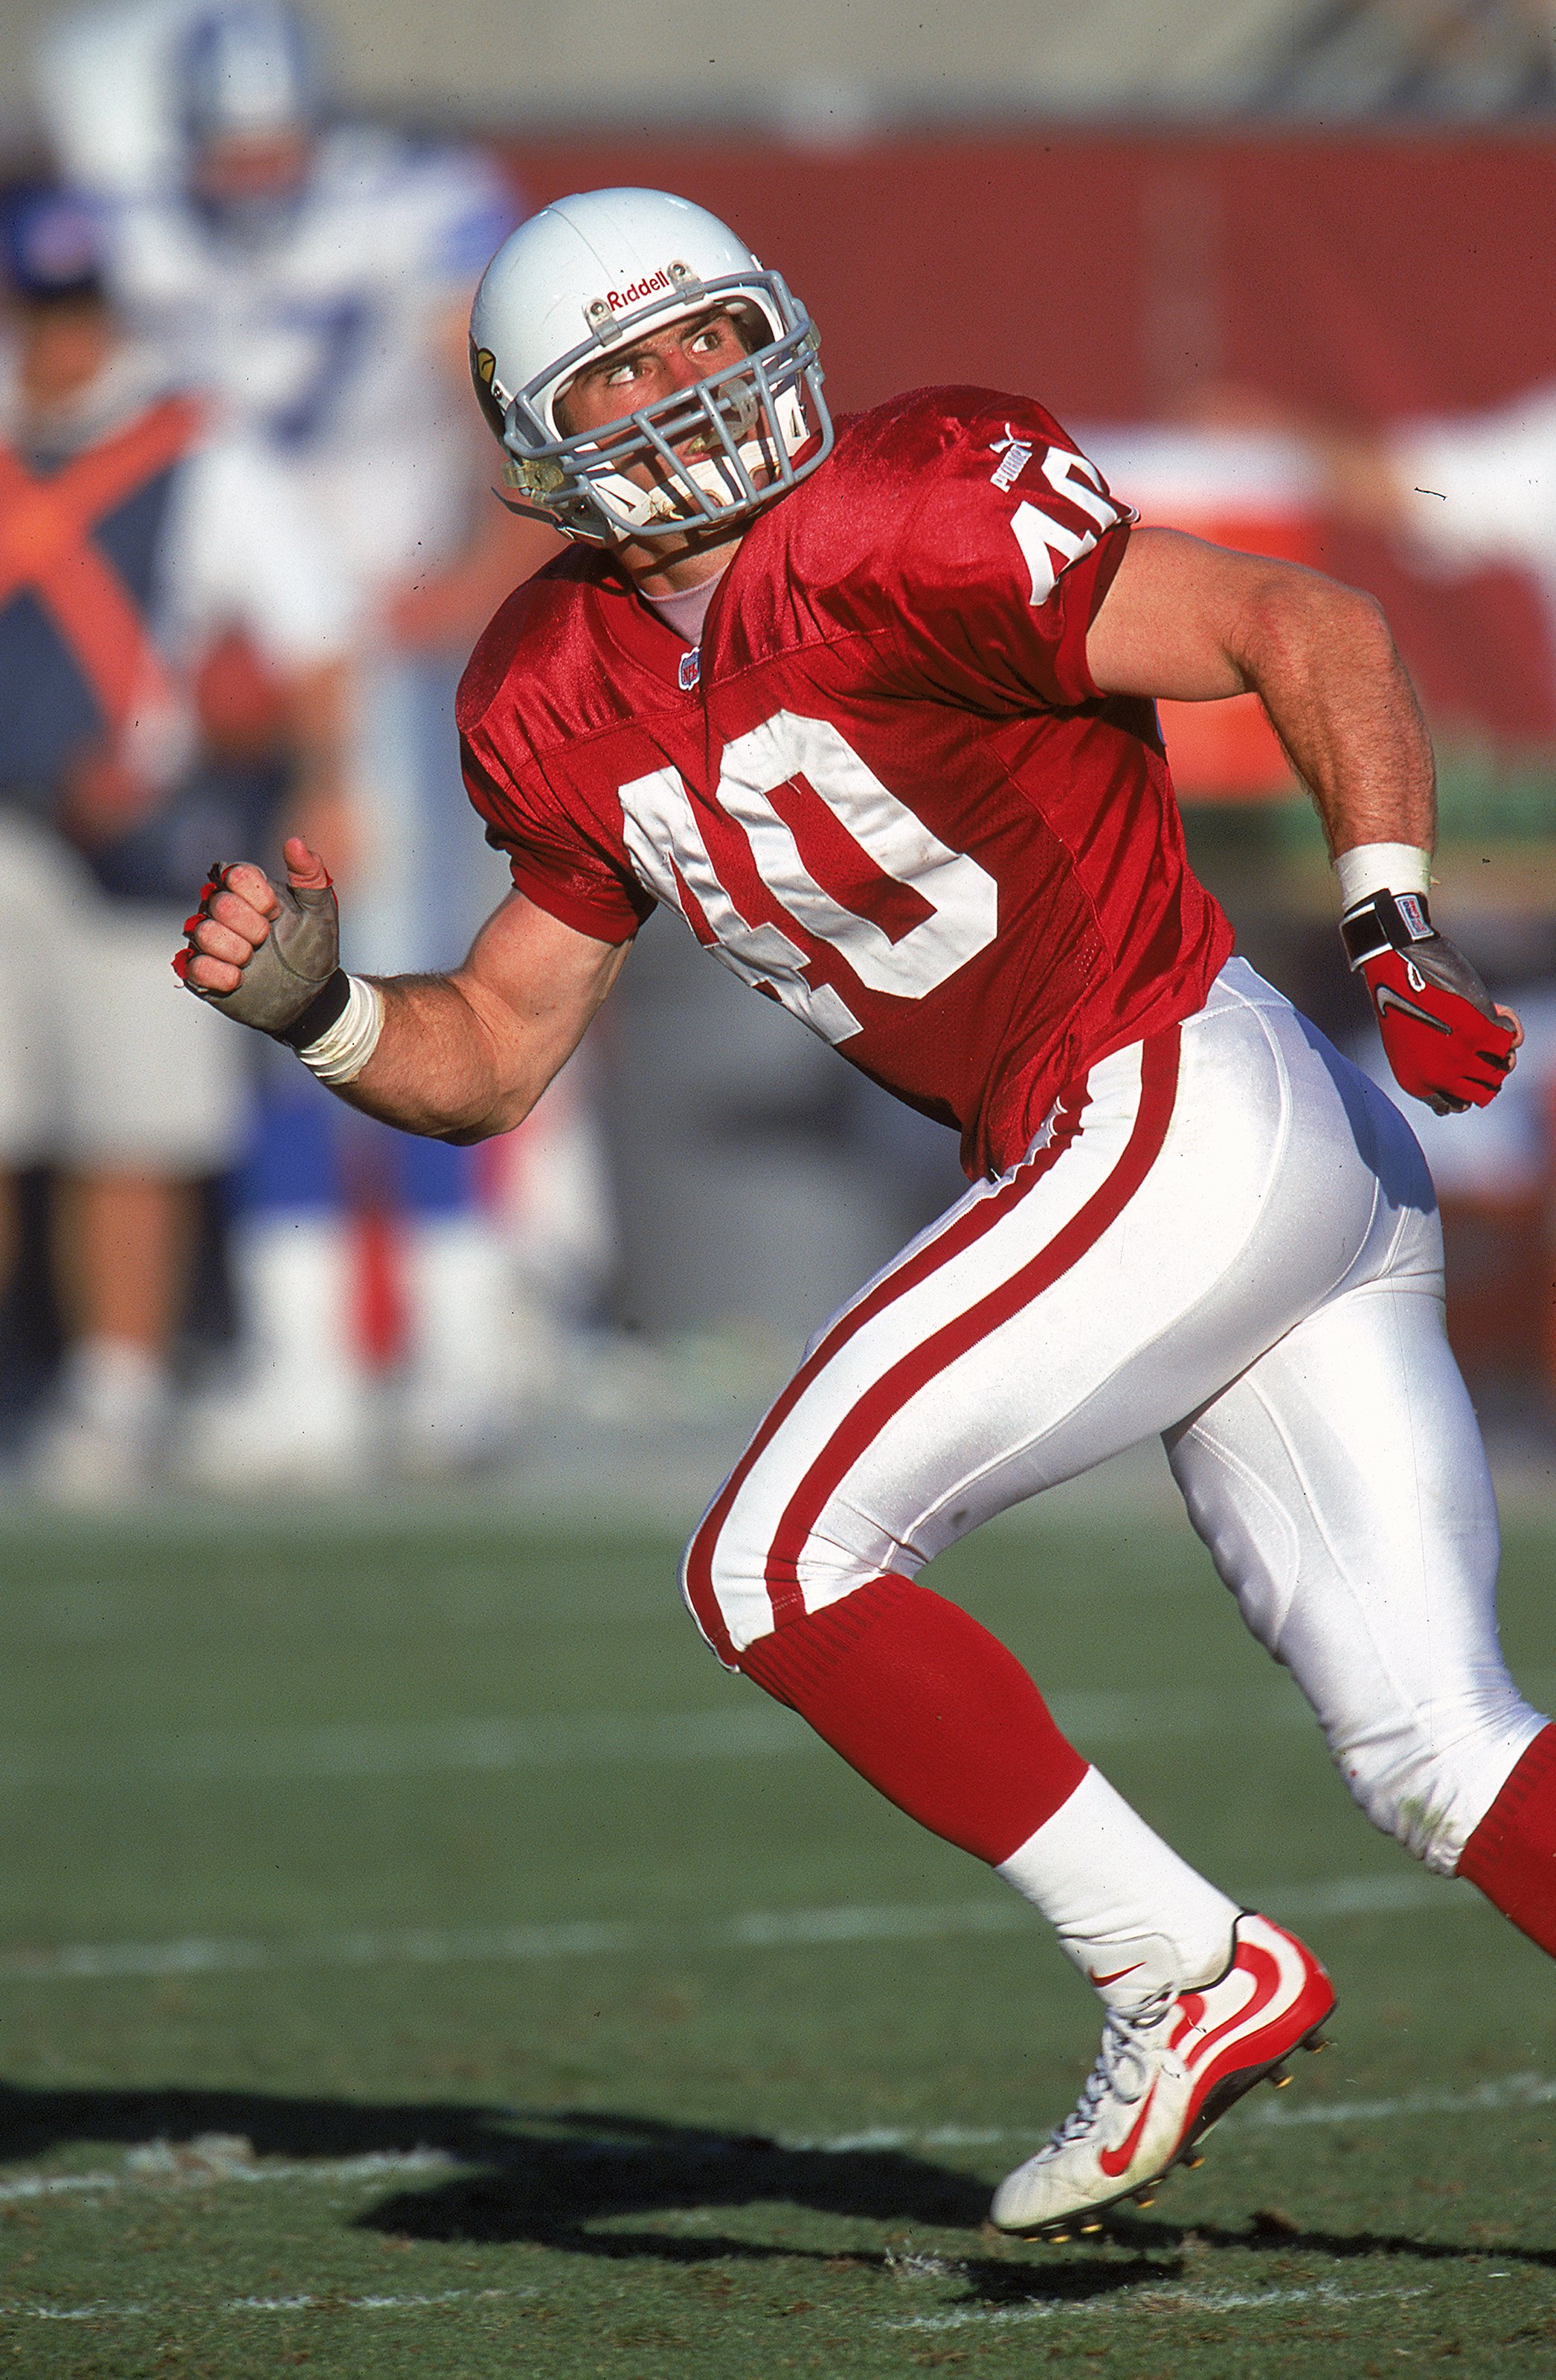 14 Nov 1999: Pat Tillman #40 of the Arizona Cardinals runs to catch the  pass during the game against the Detroit Lions at the Sun Devil Stadium in Tempe, Arizona. The Cardinals defeated the Lions 23-19. Mandatory Credit: Tom Hauck  /Allsport